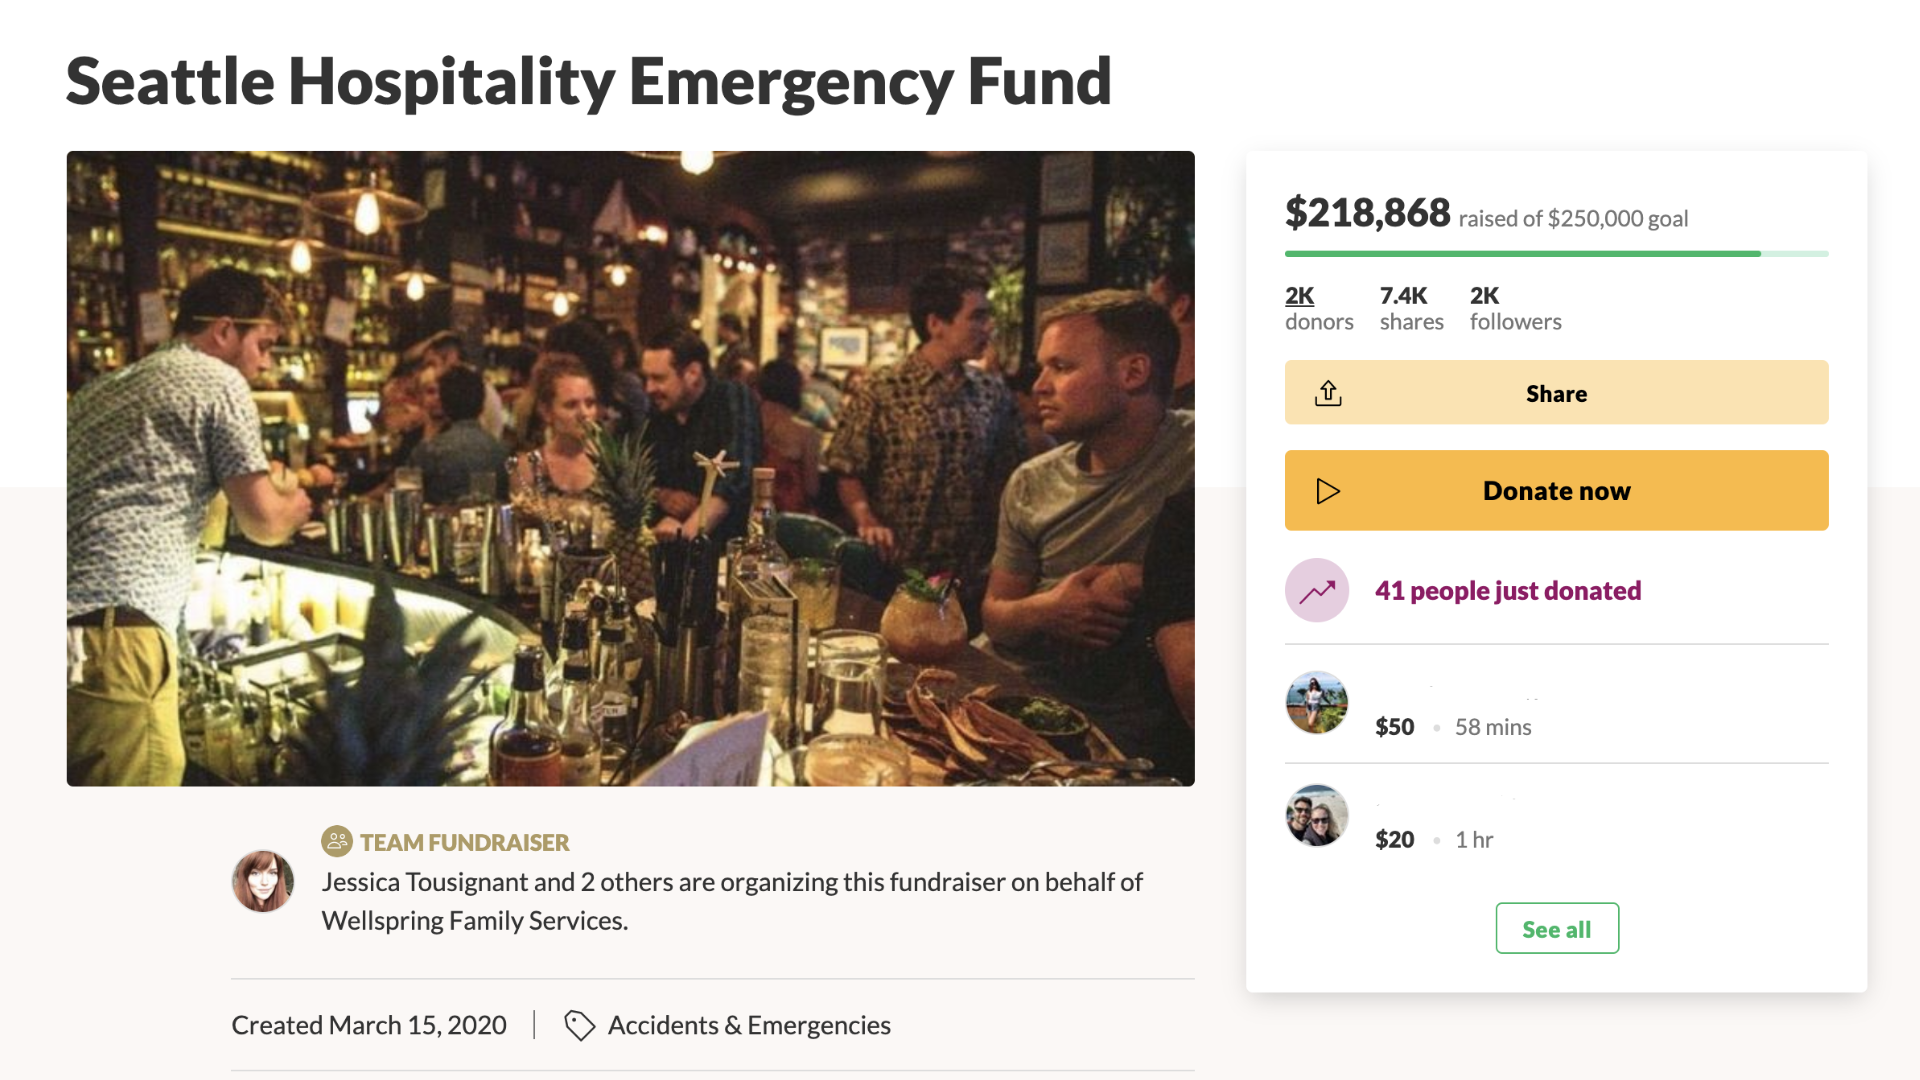 The Seattle Hospitality Emergency Fund was created to help laid off, furloughed and unemployed hospitality workers during the COVID-19 crisis.